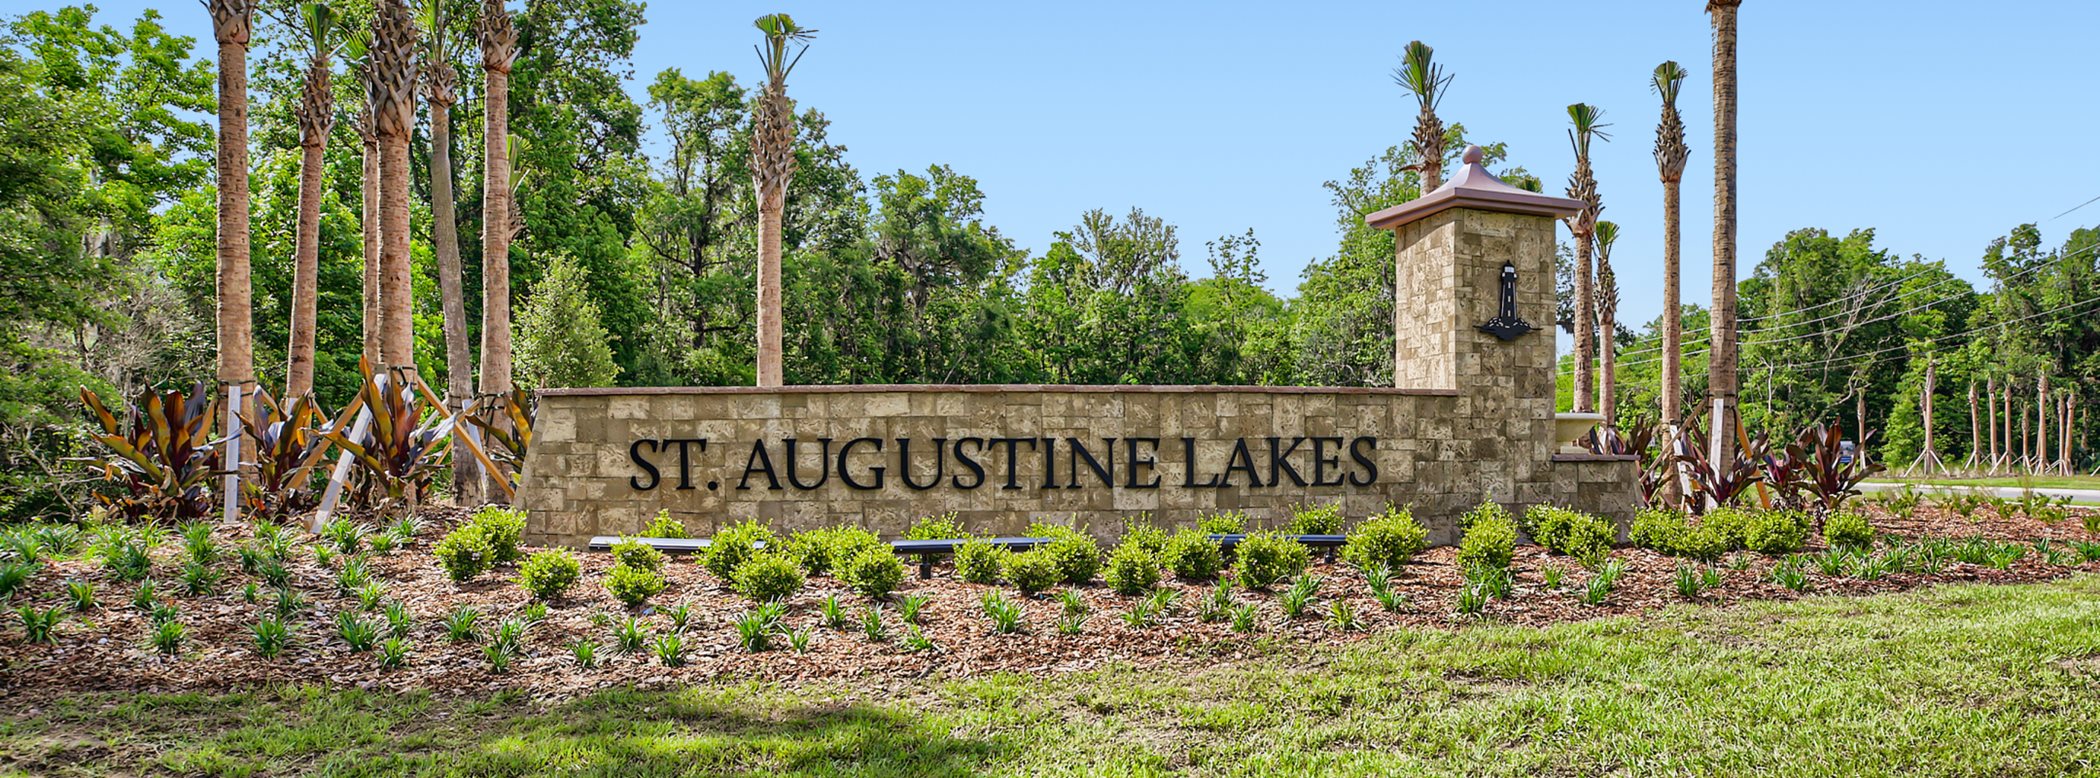 St Augustine Lakes entry monument